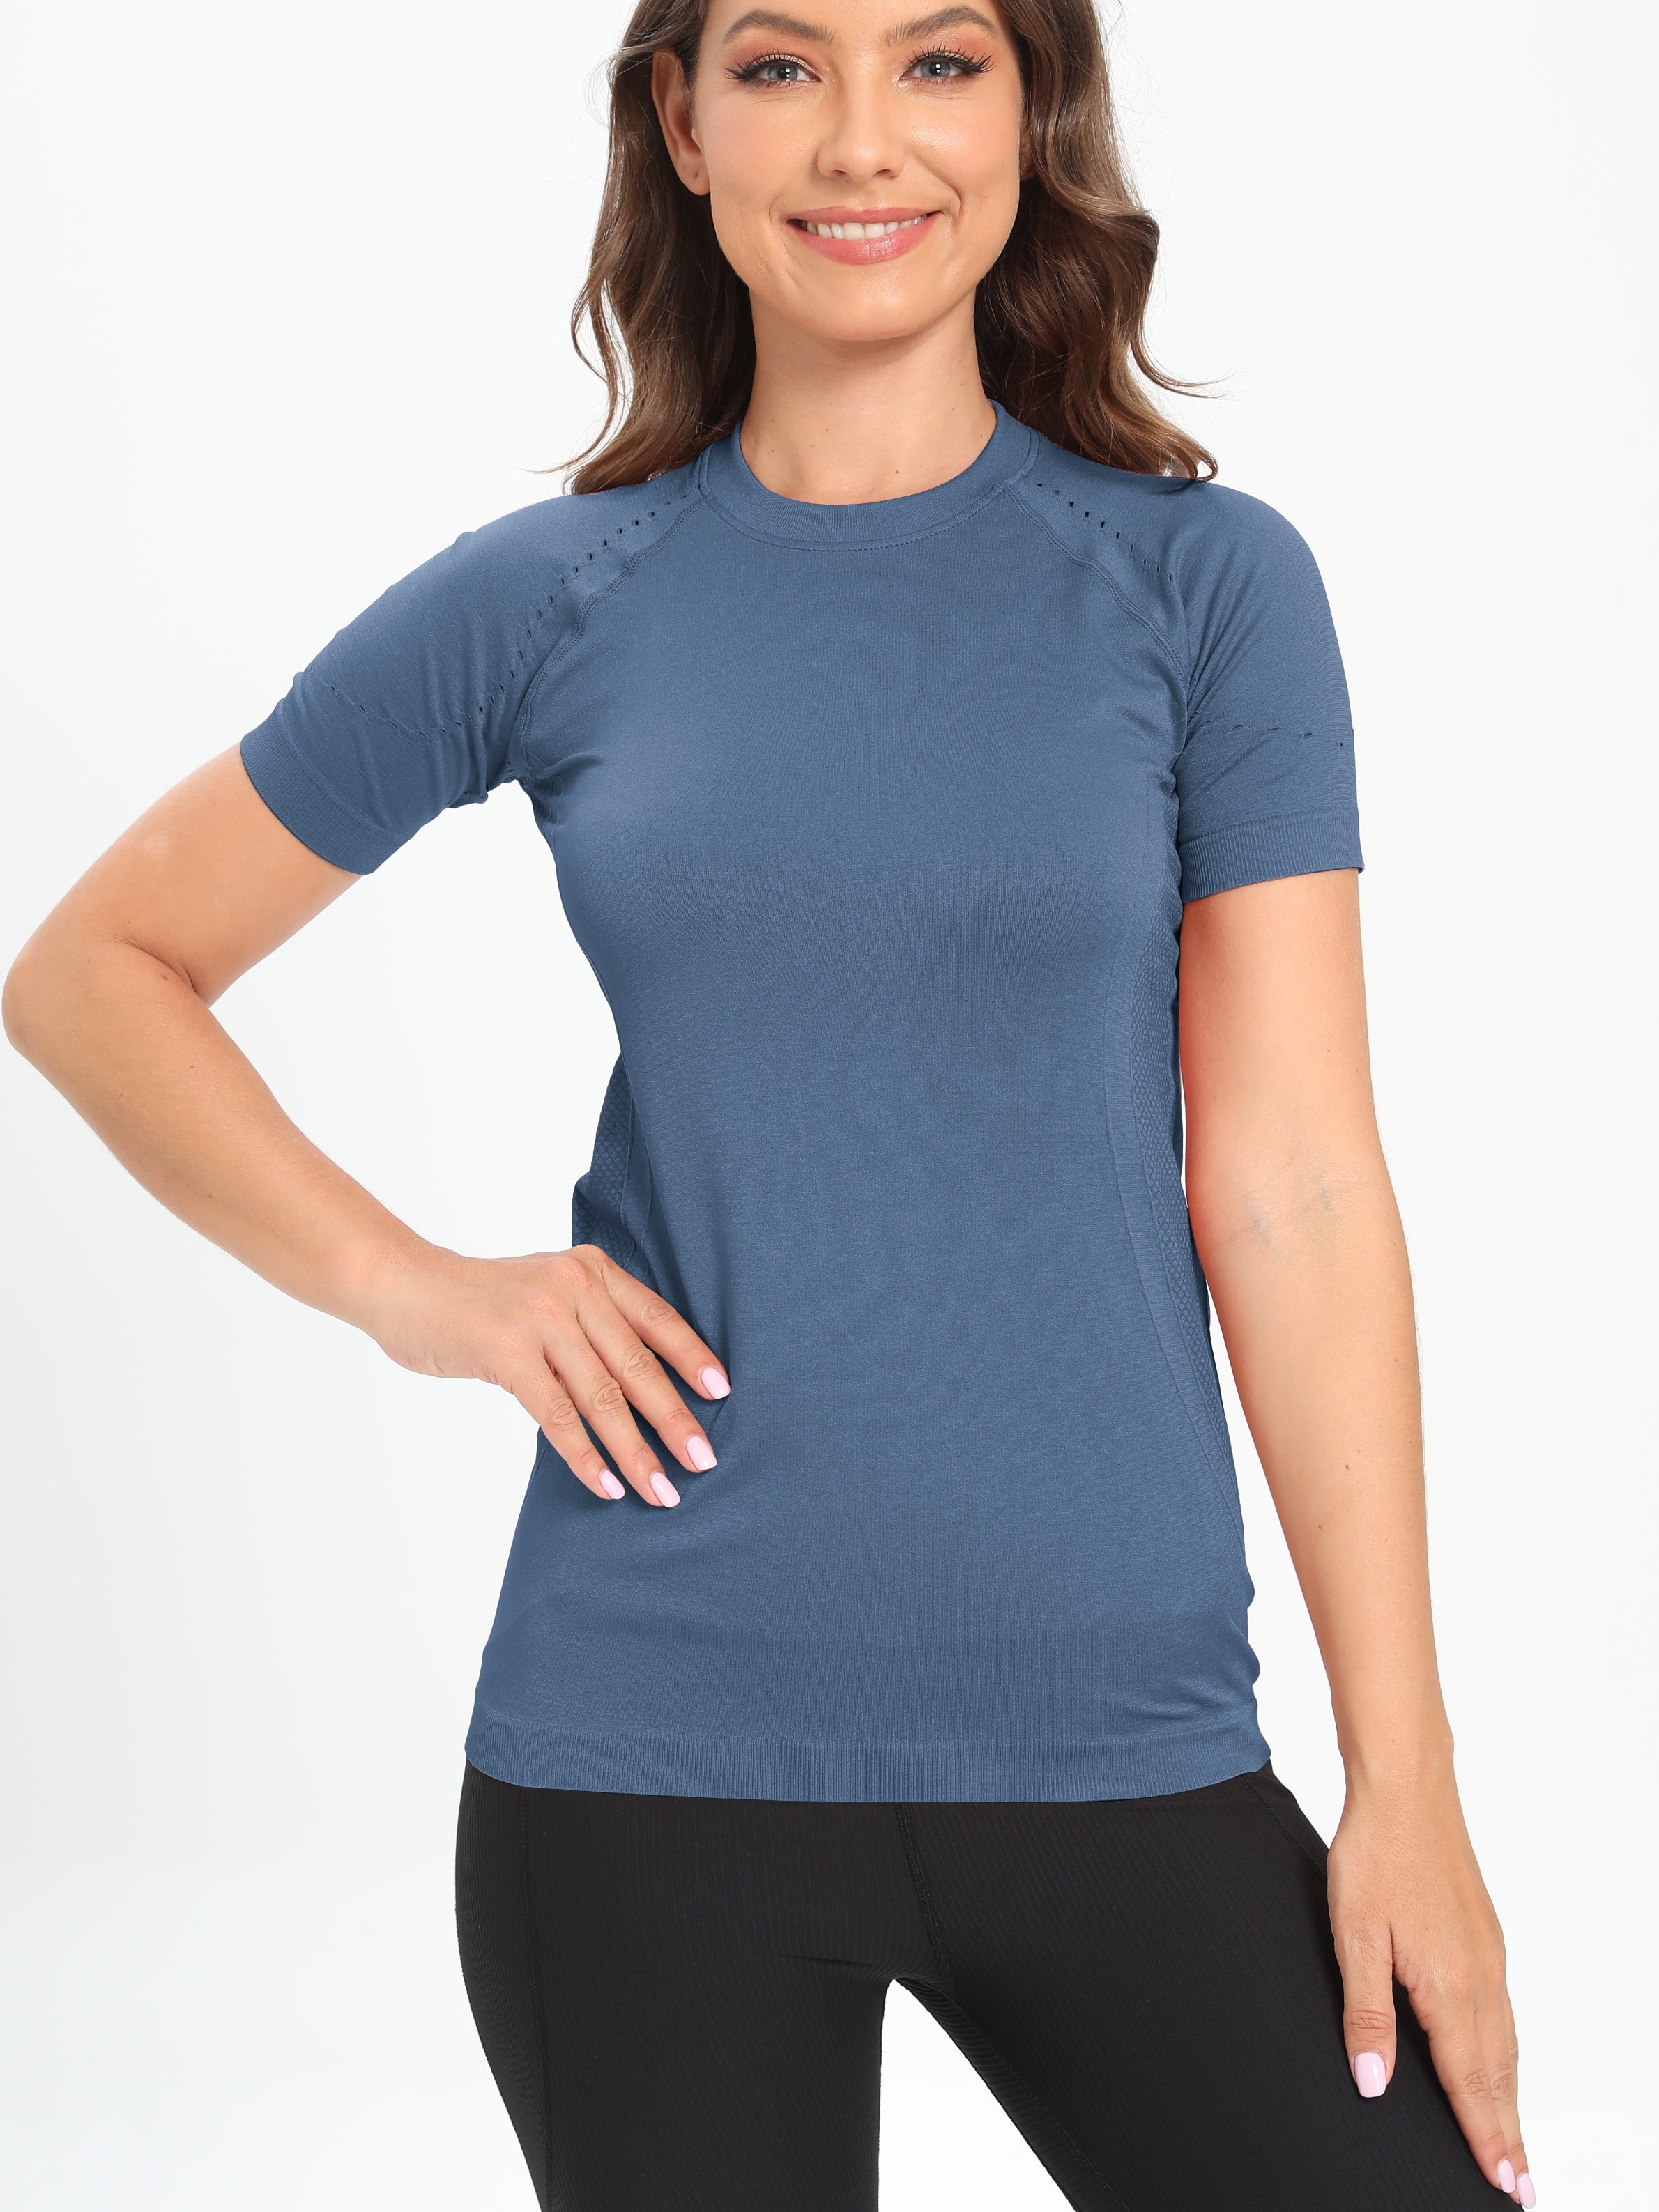 Women Sports Yoga Shirts Short Sleeve Seamless Breathable Quick Dry T-Shirt  Top